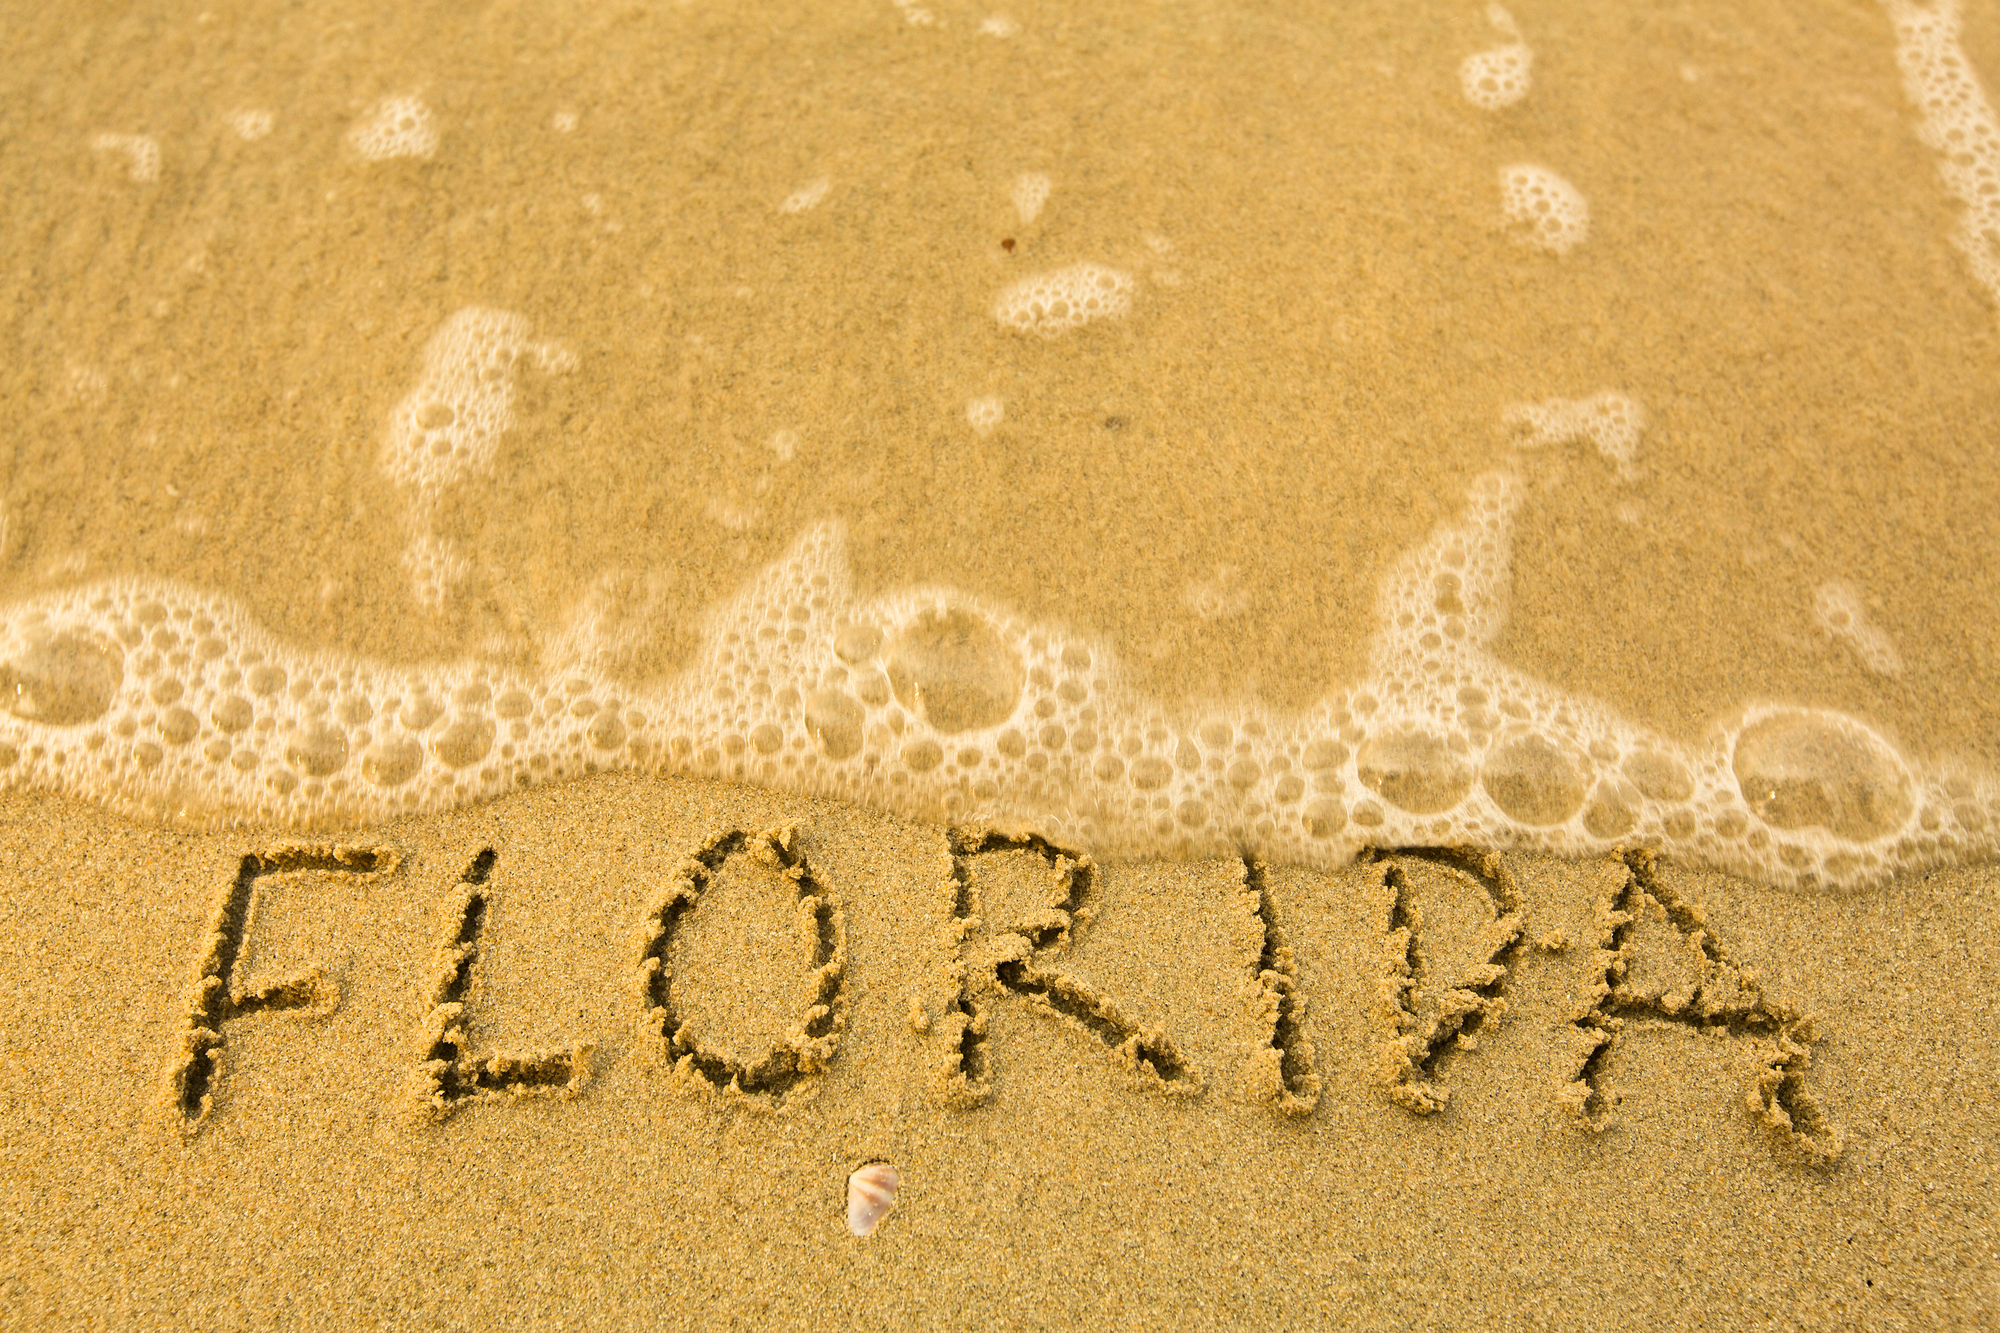 The word Florida written on the sand